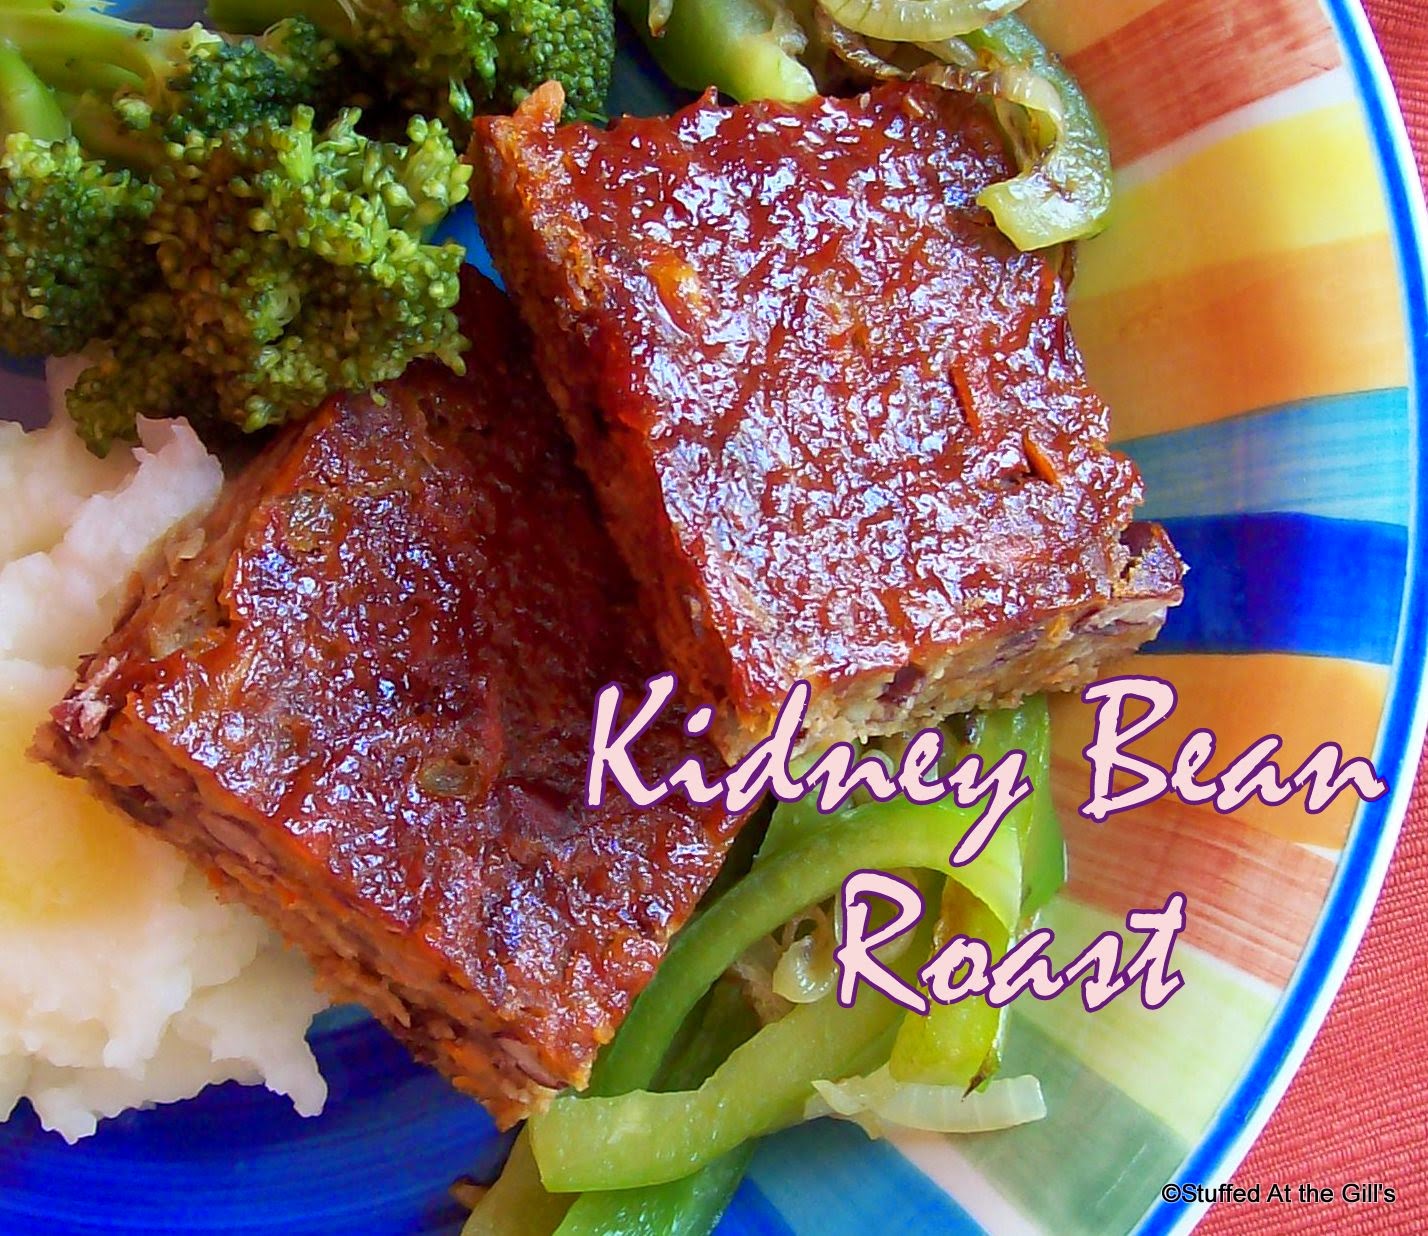 Kidney Bean Roast served with mashed potato and broccoli.